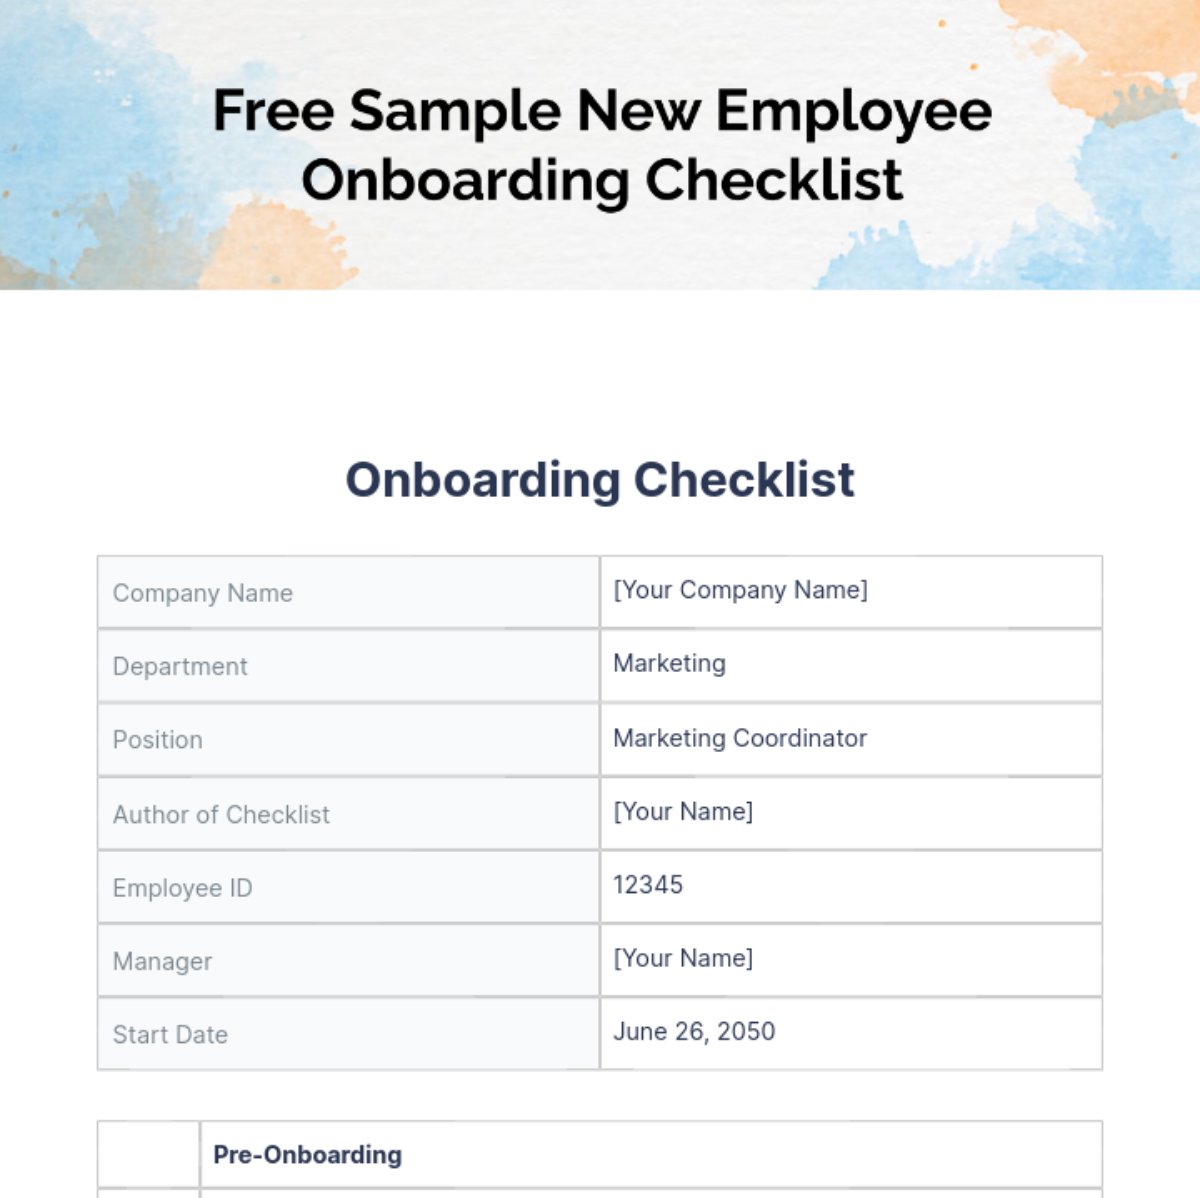 Sample New Employee Onboarding Checklist Template